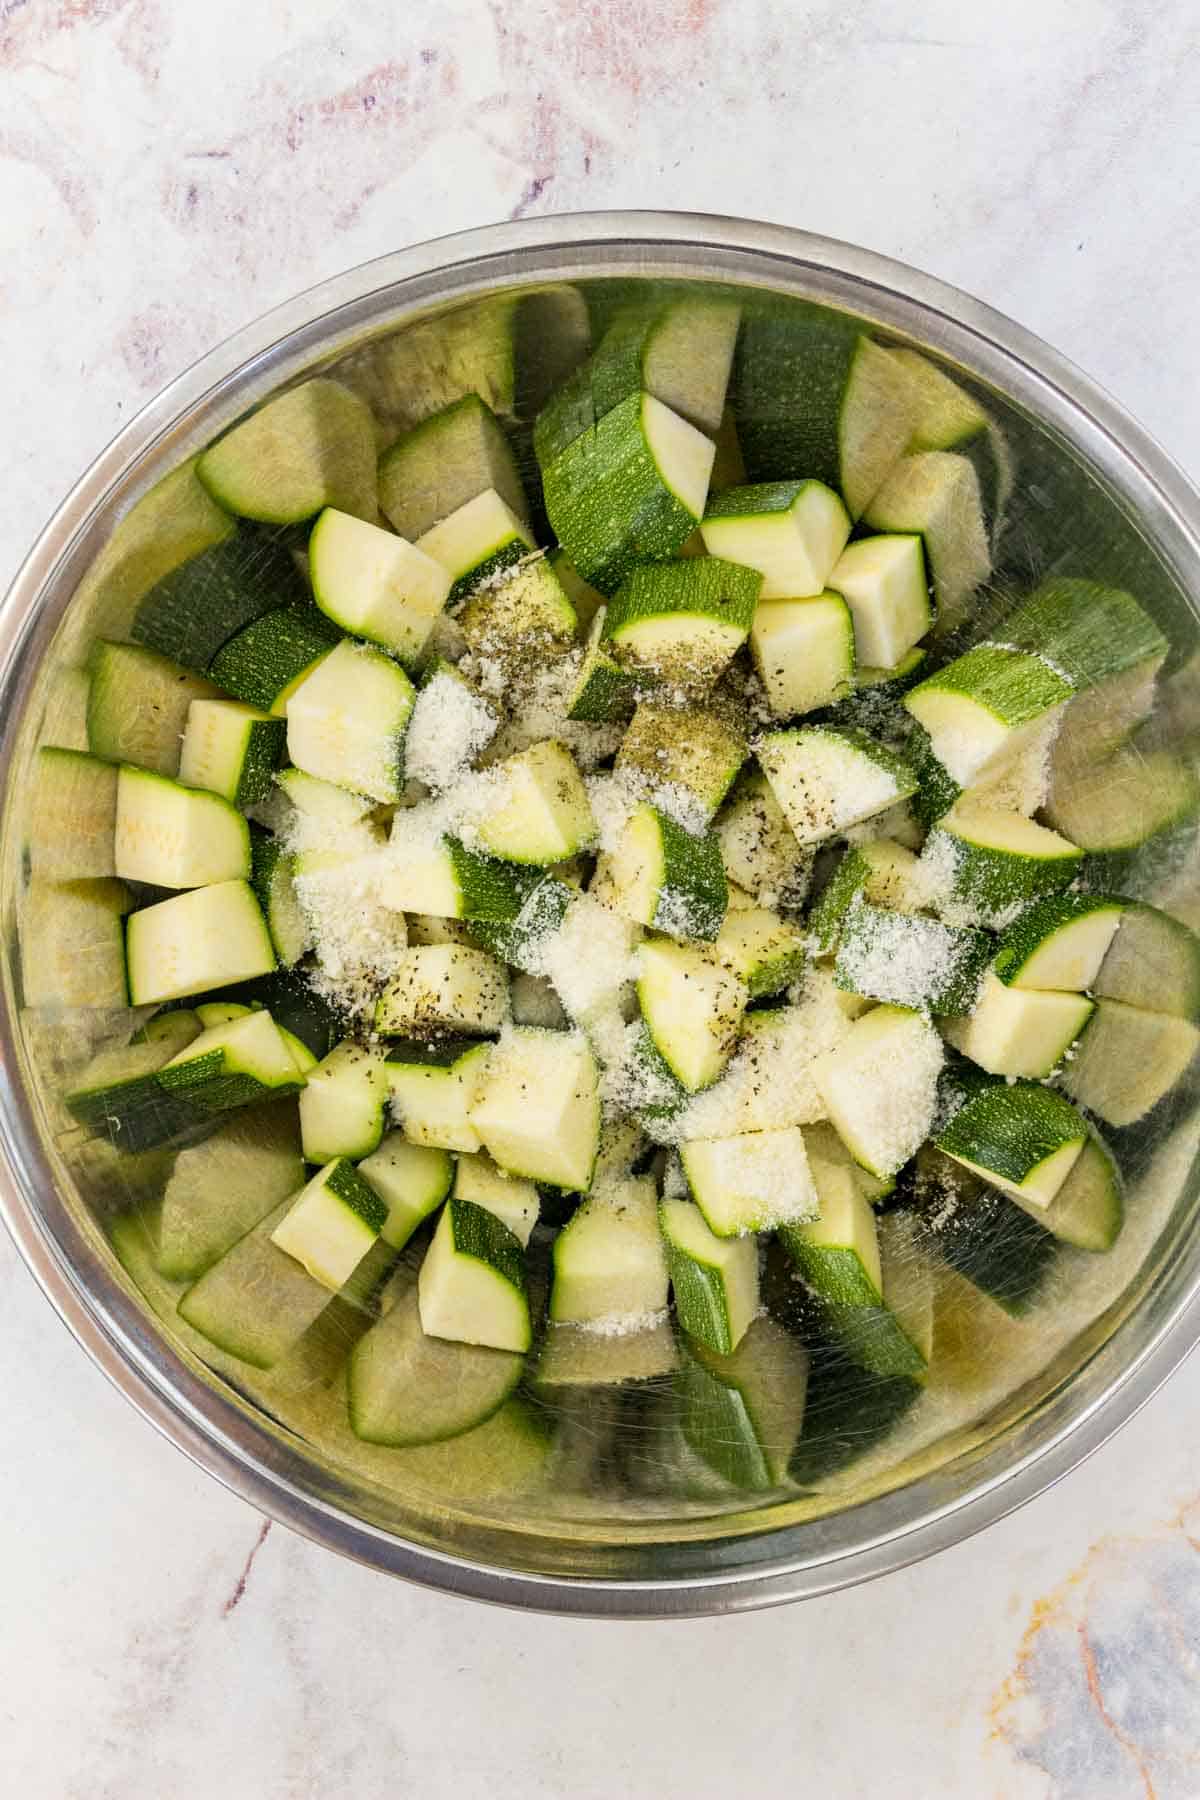 Parmesan and seasonings are added into a bowl with chunks of chopped zucchini.